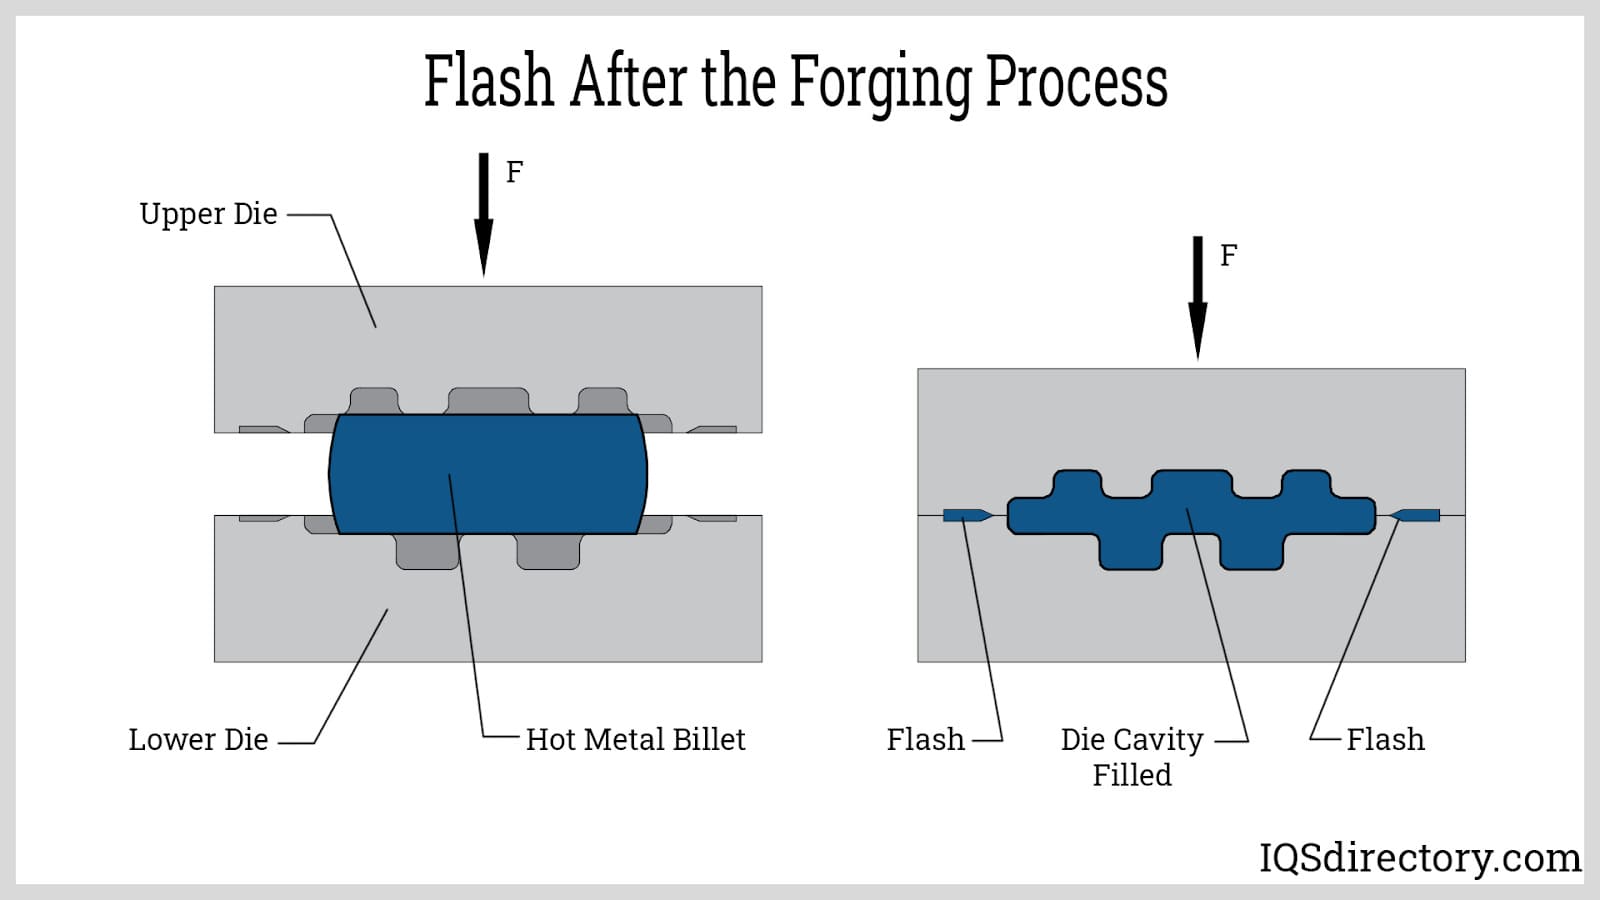 Flash After the Forging Process